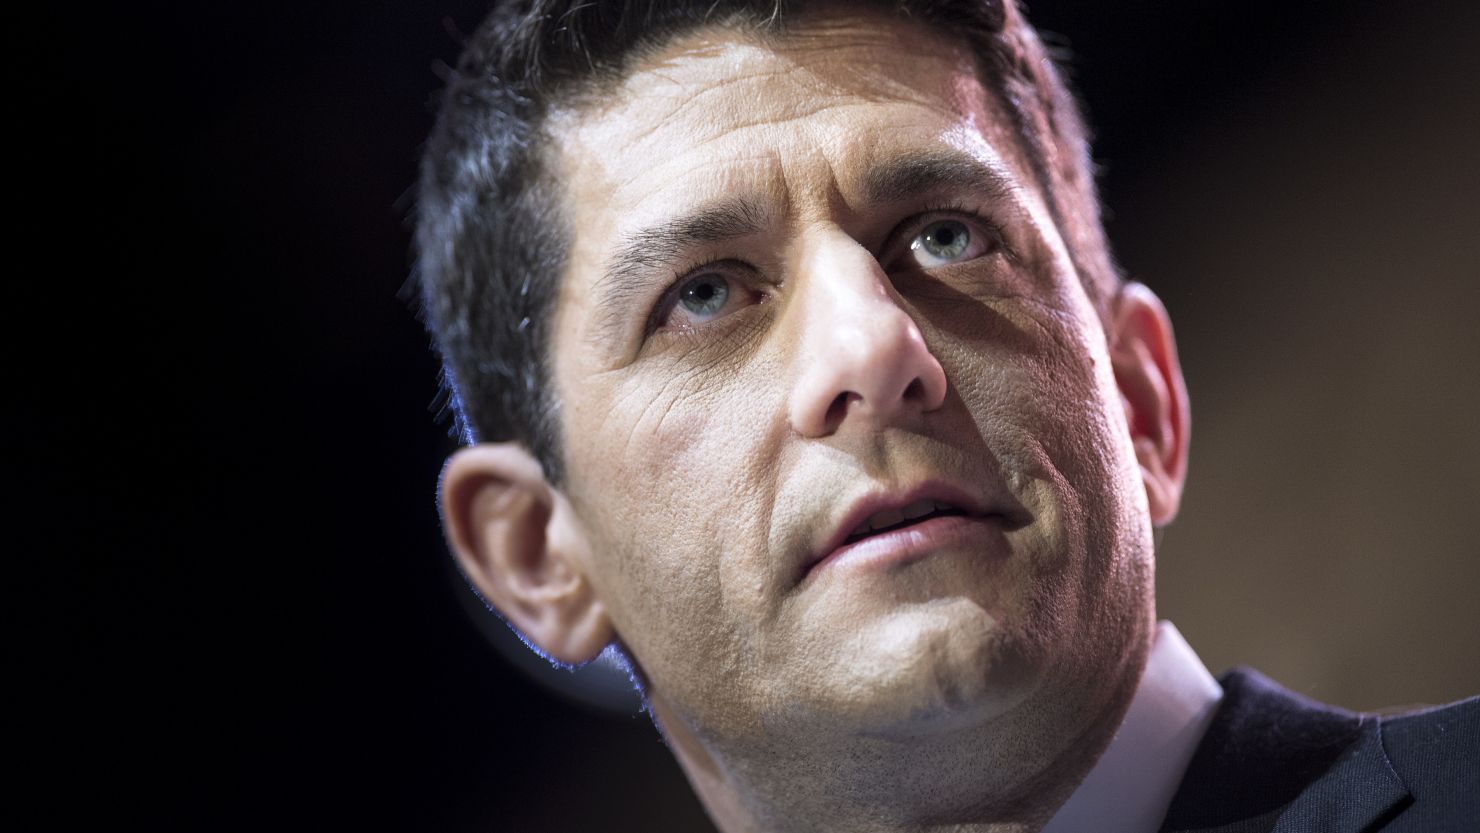 Rep. Paul Ryan's 2015 budget calls for $5.1 trillion in spending cuts over the next decade.